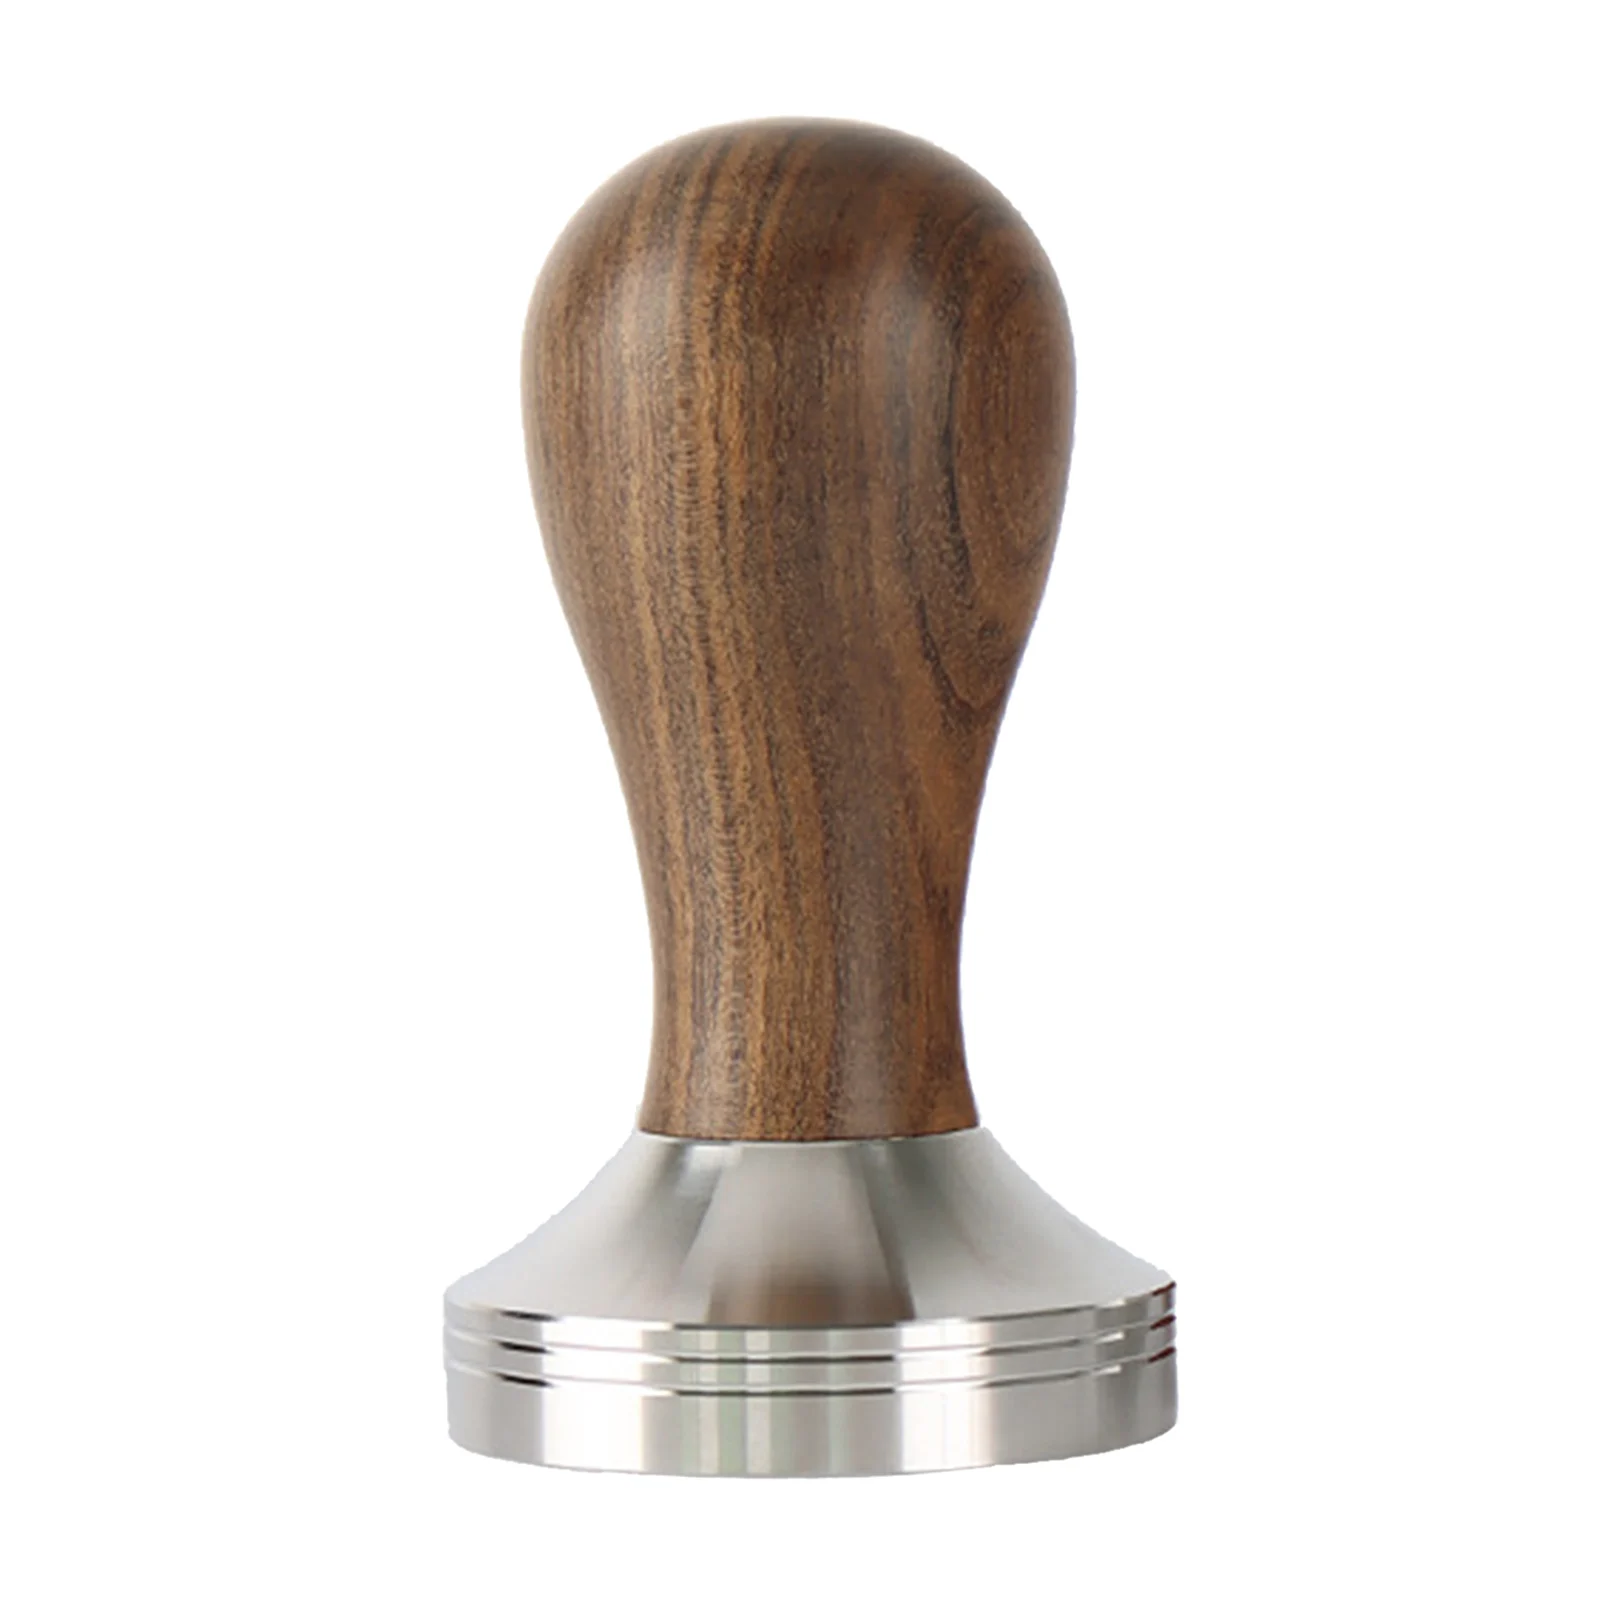 Stainless Steel Professional Barista Coffee Tamper w/Wooden Handle Flat Base